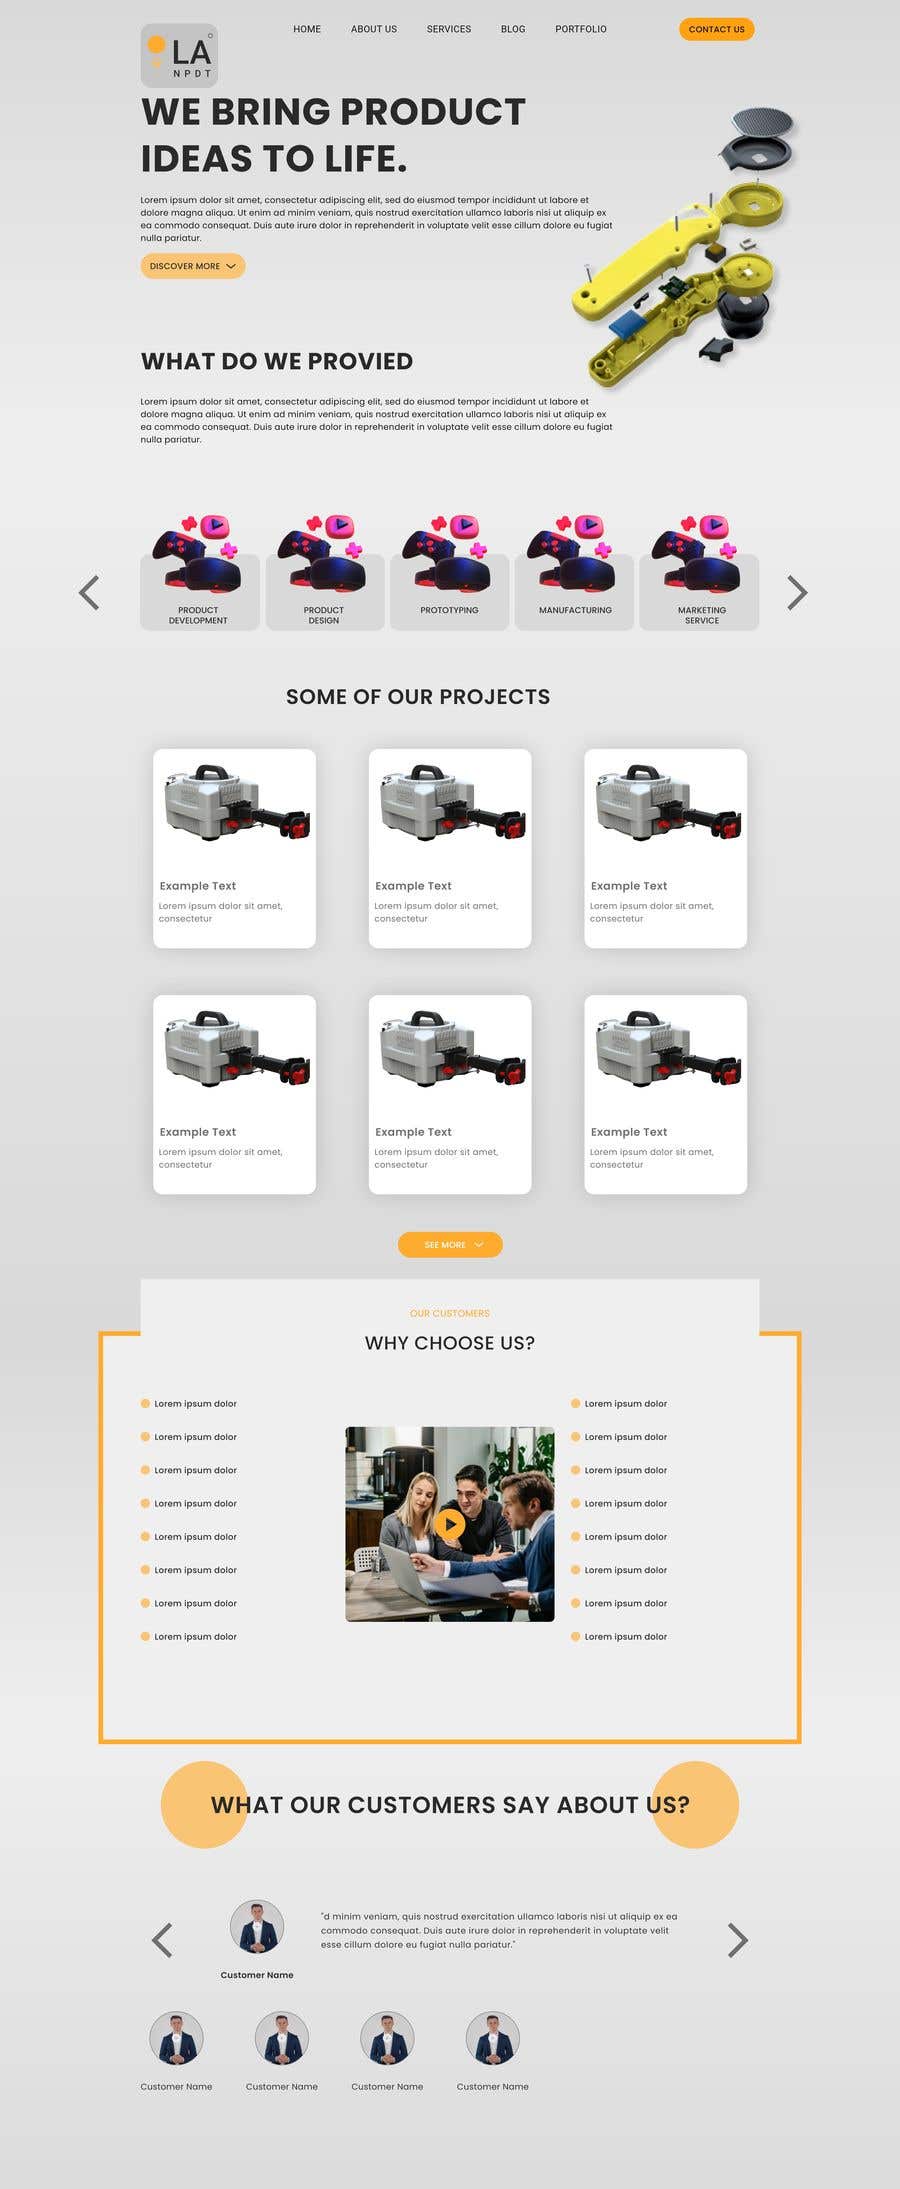 Bài tham dự cuộc thi #61 cho                                                 Design a landing page for a product design, development, and manufacturing company!
                                            